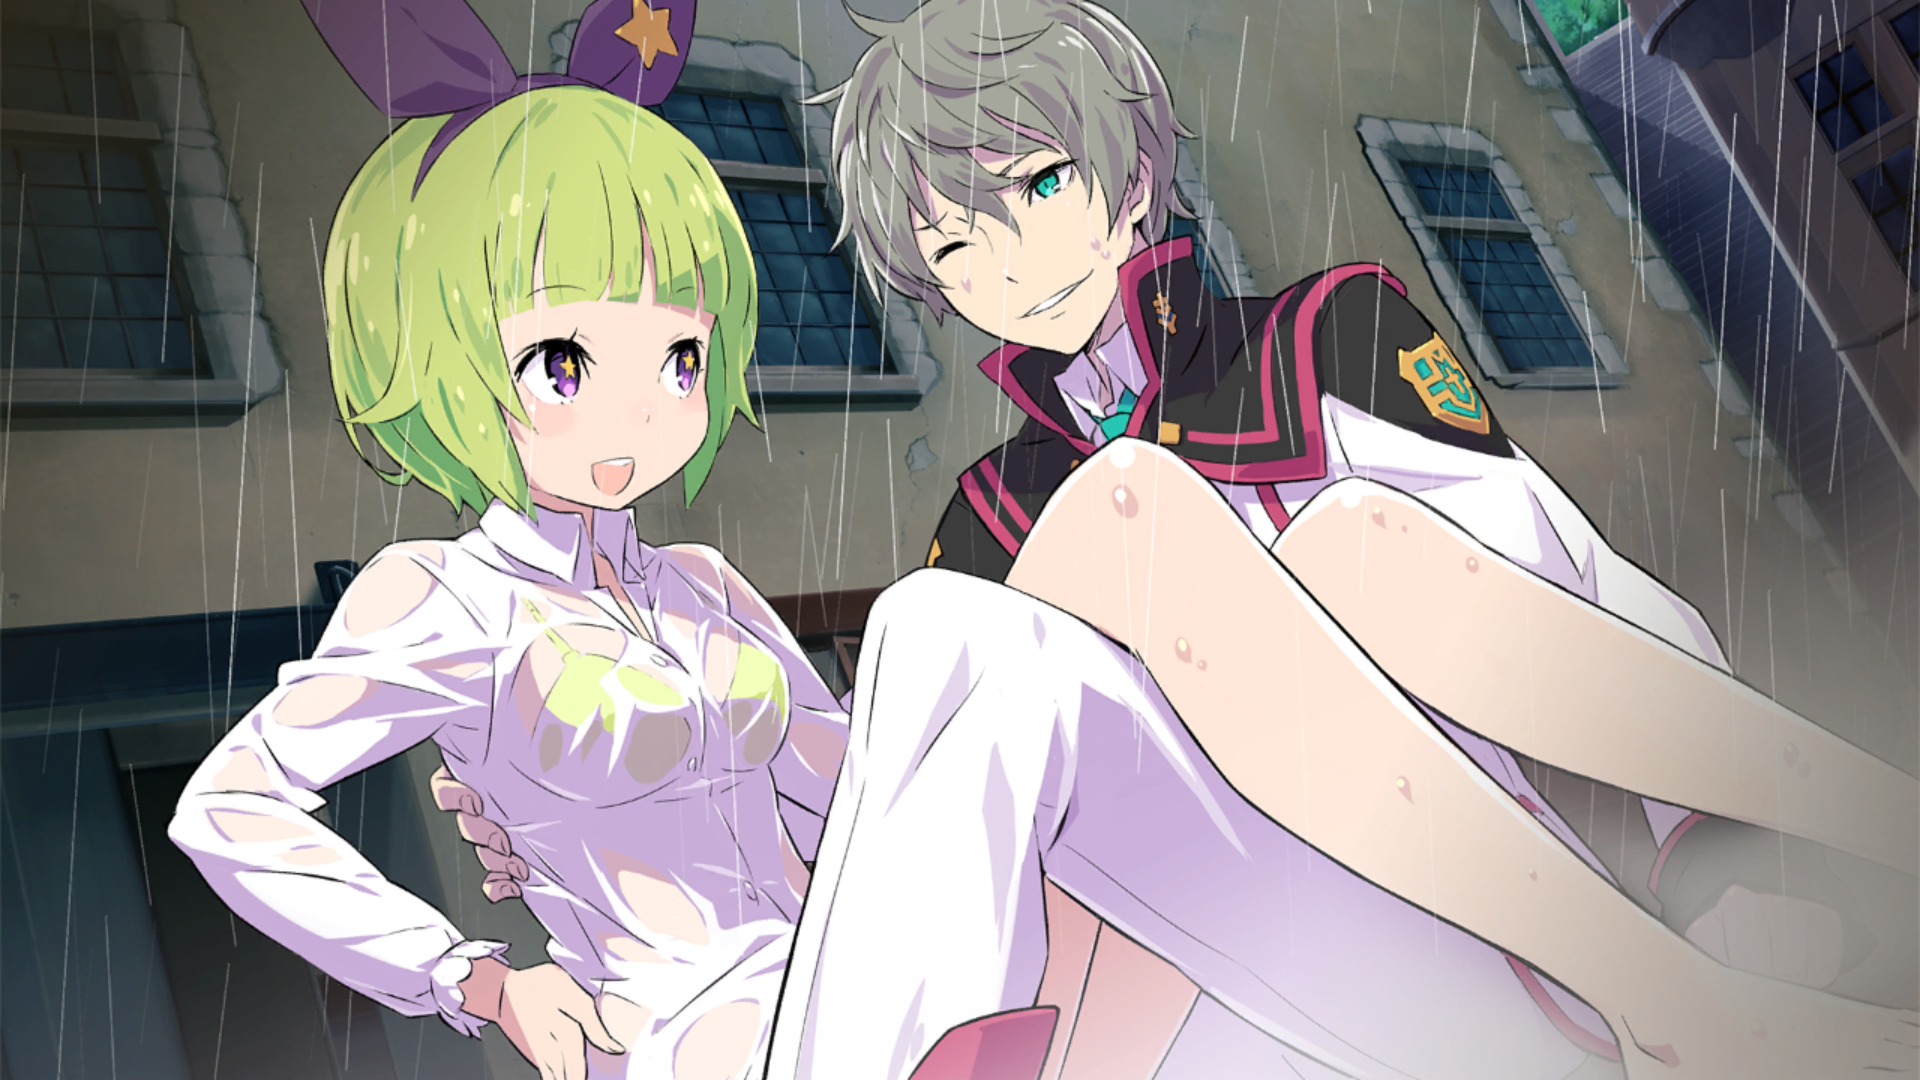 Parent's Guide: Conception II: Children of the Seven Stars